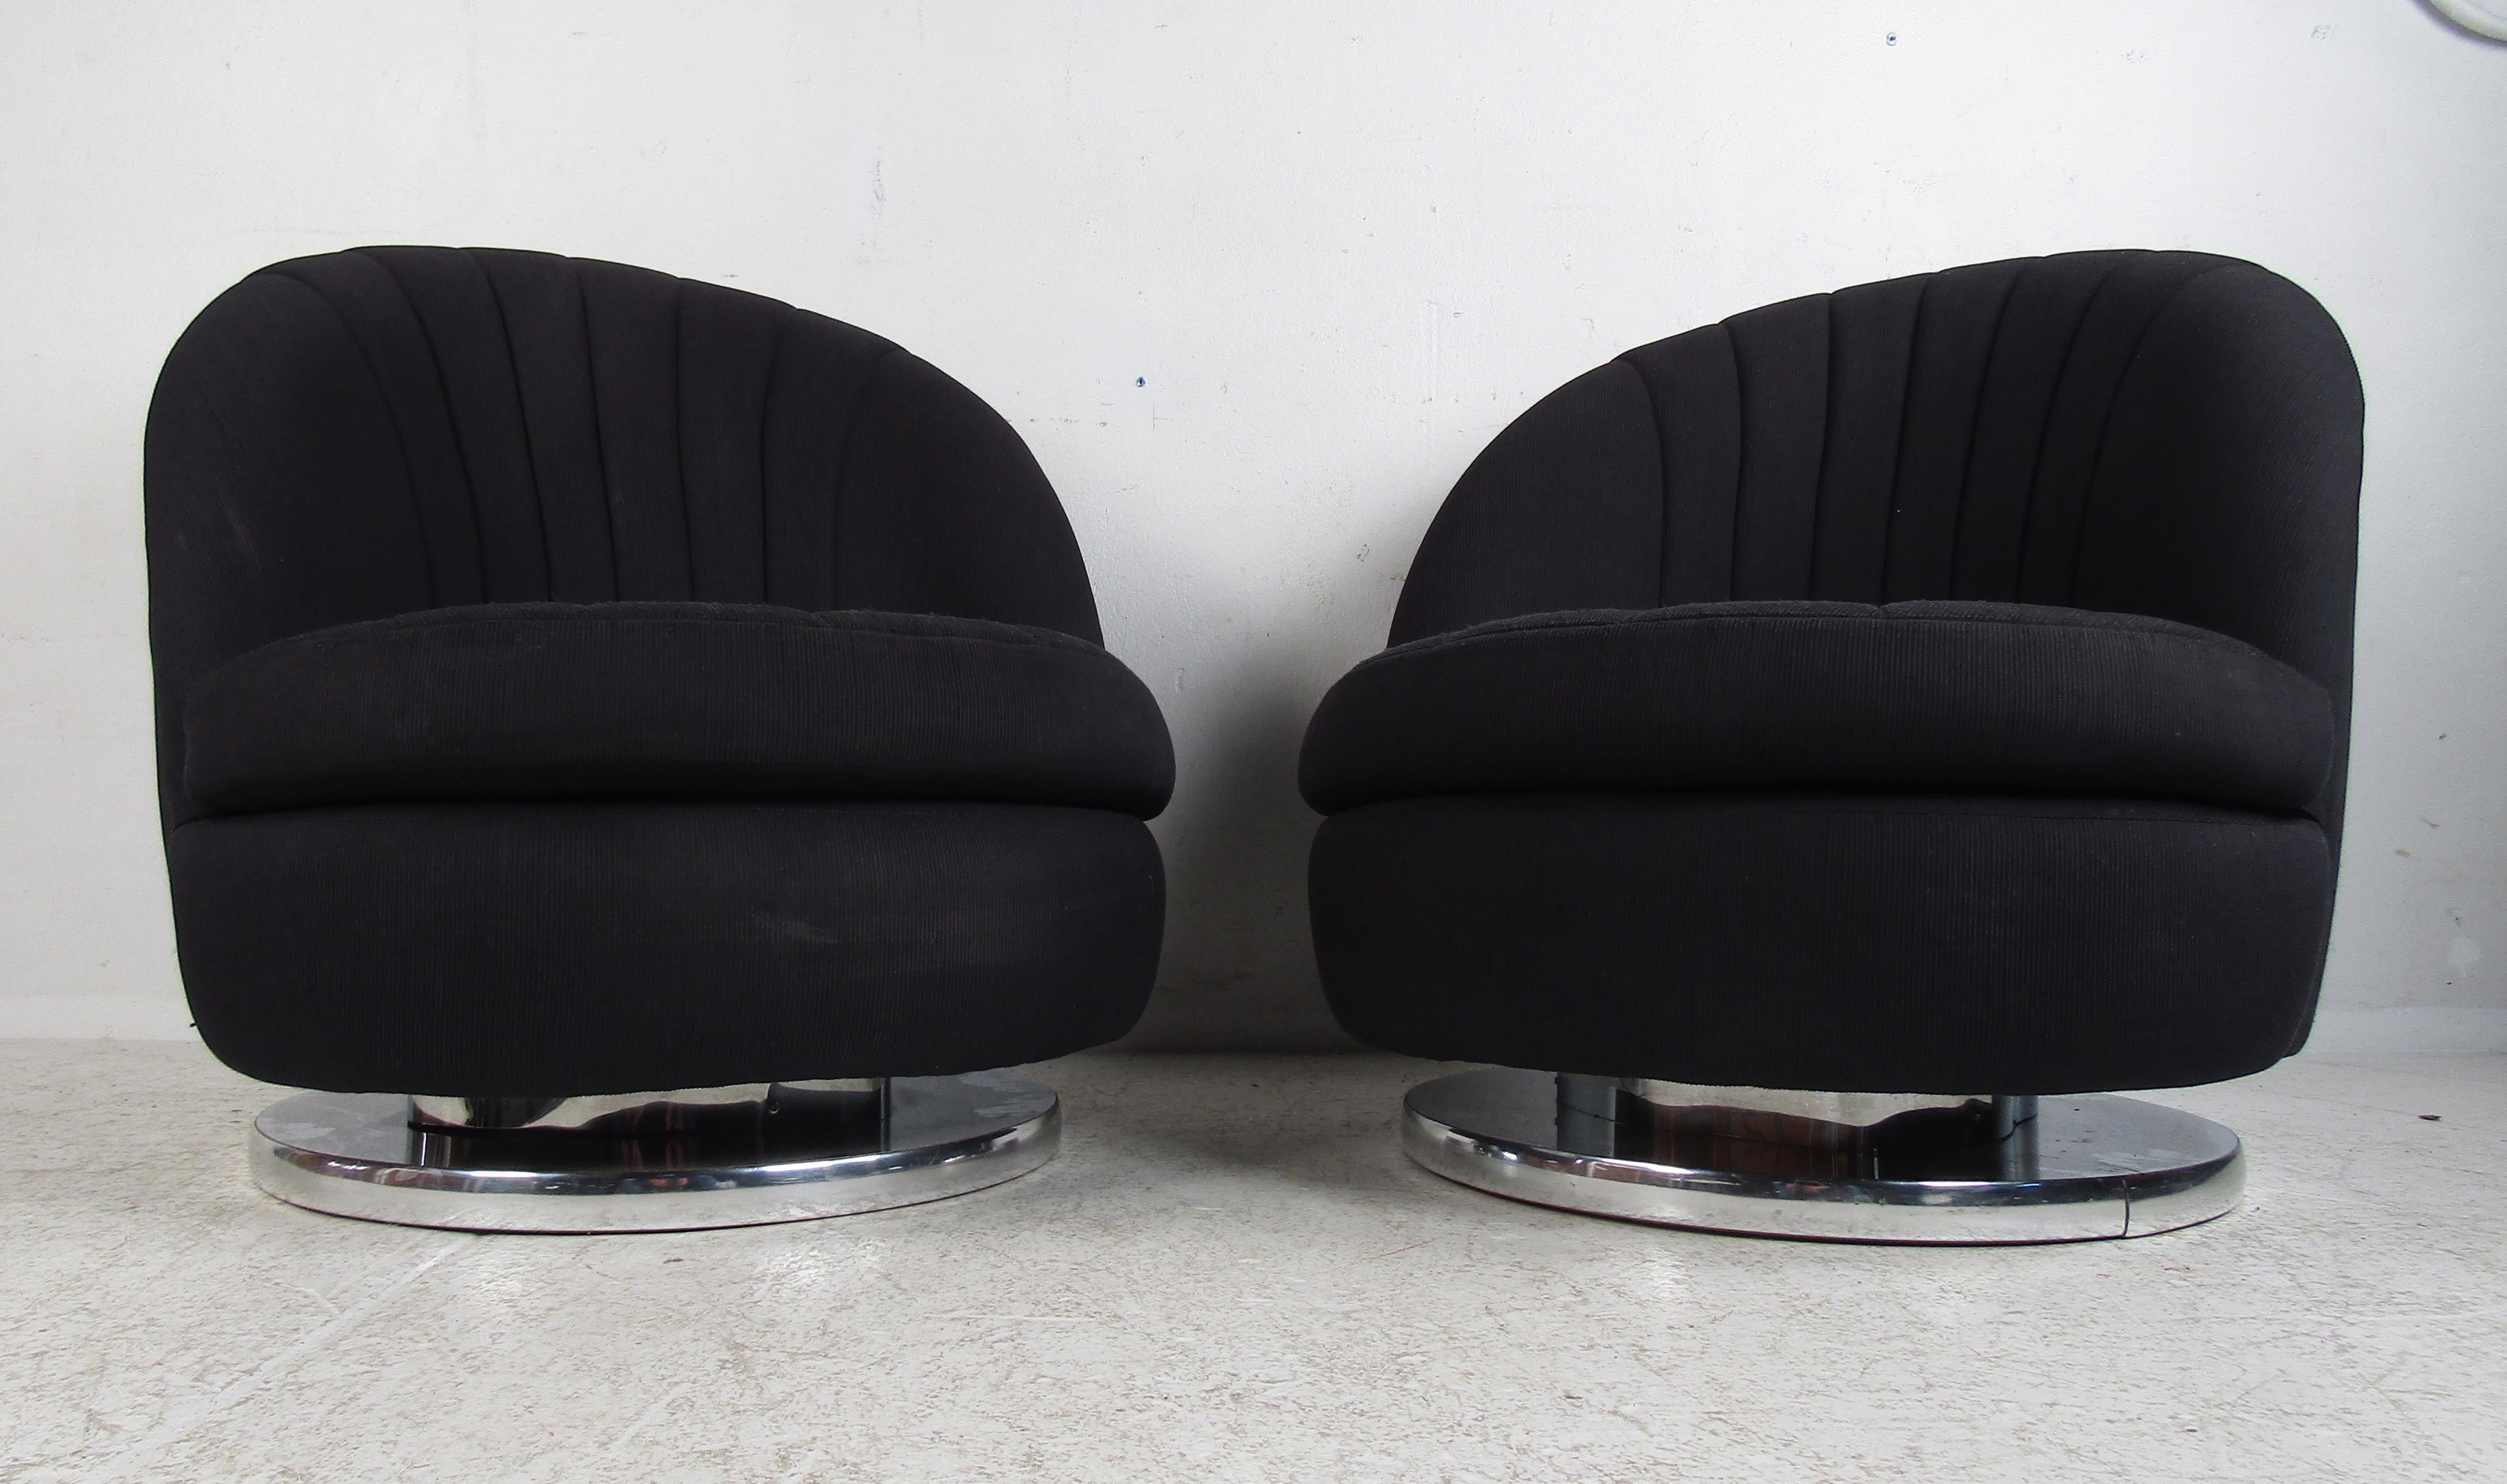 This stunning vintage modern pair of lounge chairs float on top of a circular chrome trim swivel base. The shell backrest and removable seat cushions boast the perfect contours ensuring maximum comfort. This lovely slipper chair with plush black